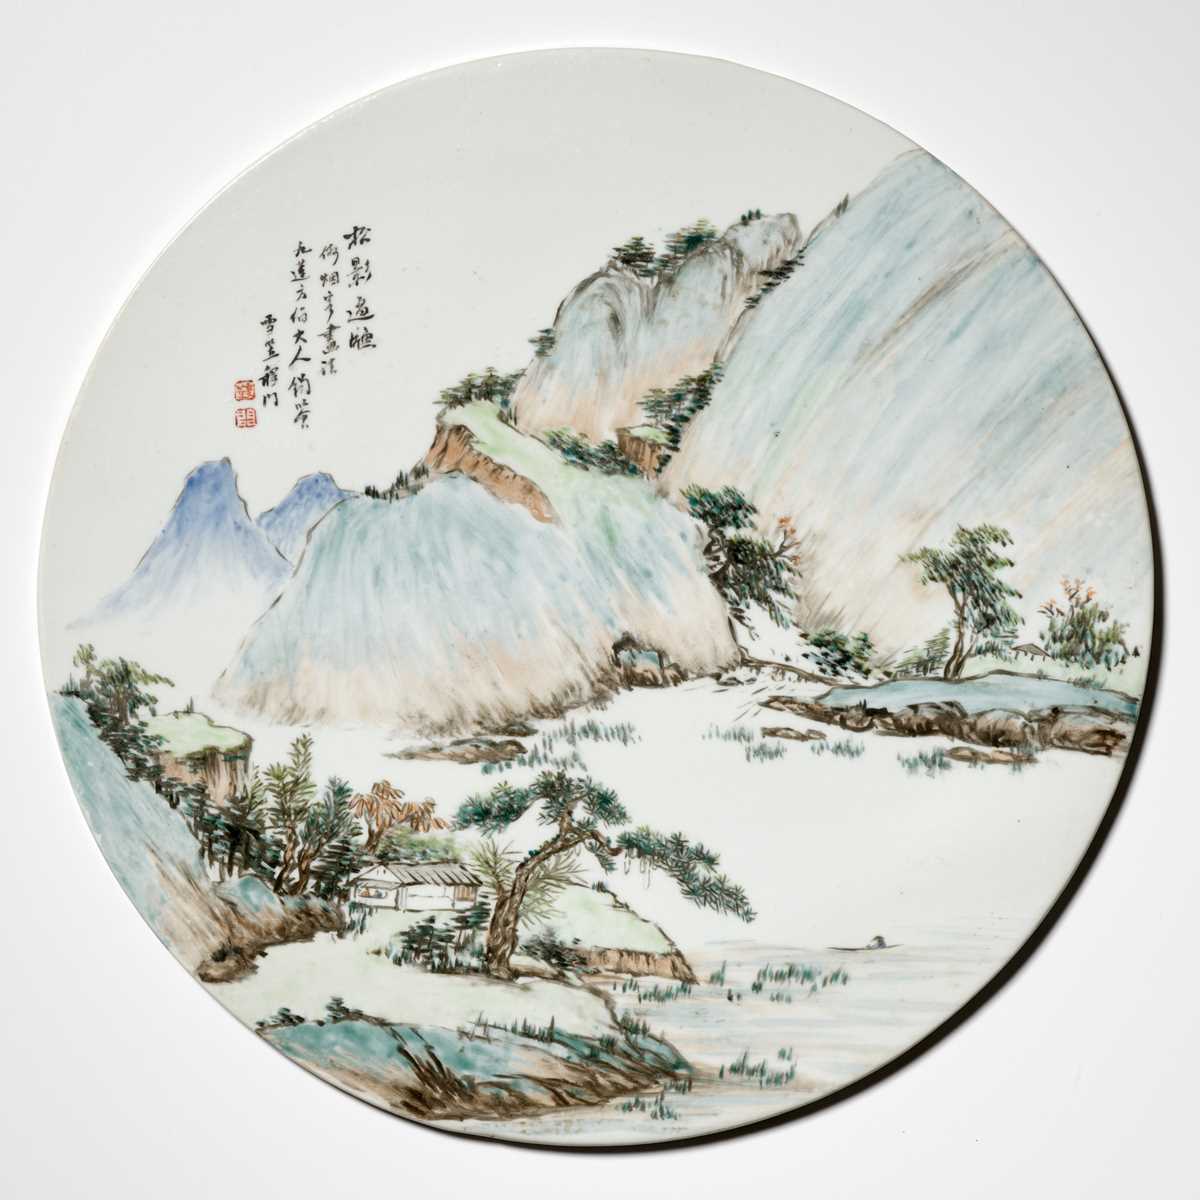 Lot 280 - A ‘QIANJIANG CAI’ ENAMELED ‘IN THE SHADOW OF THE PINES’ PLAQUE, ATTRIBUTED TO CHENG MEN (1862-1908)